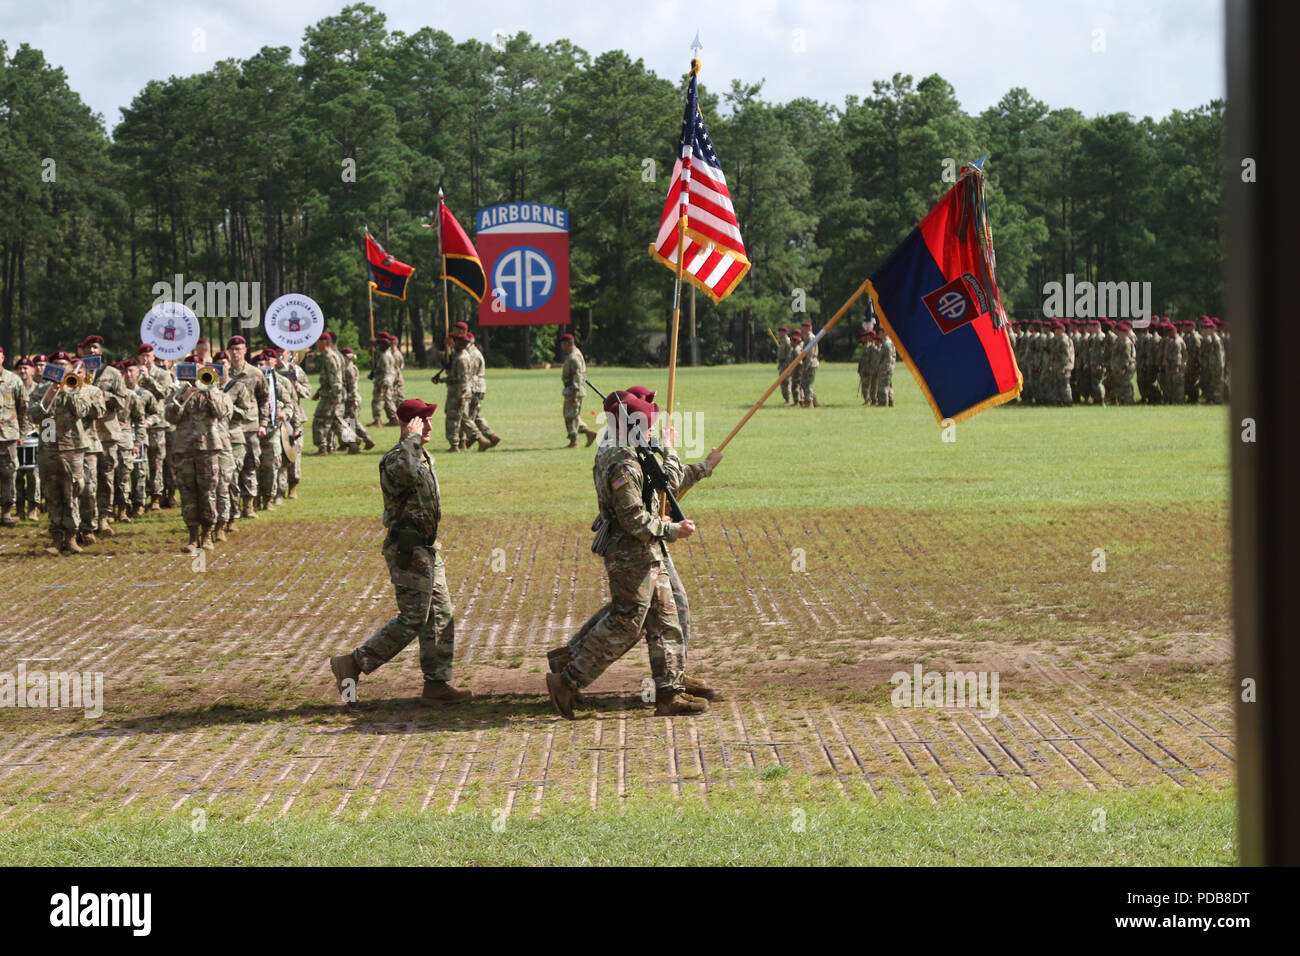 The 82nd Airborne Division color guard salutes during pass in review of a change of command ceremony at Pike Field on Fort Bragg, North Carolina, Aug. 2, 2018. The ceremony honored the U.S. Army Maj. Gen. Michael Kurilla, the outgoing division commanding general, and welcomed Maj. Gen. James Mingus, the incoming commanding general. (U.S. Army photo by Sgt. Michelle U. Blesam) Stock Photo